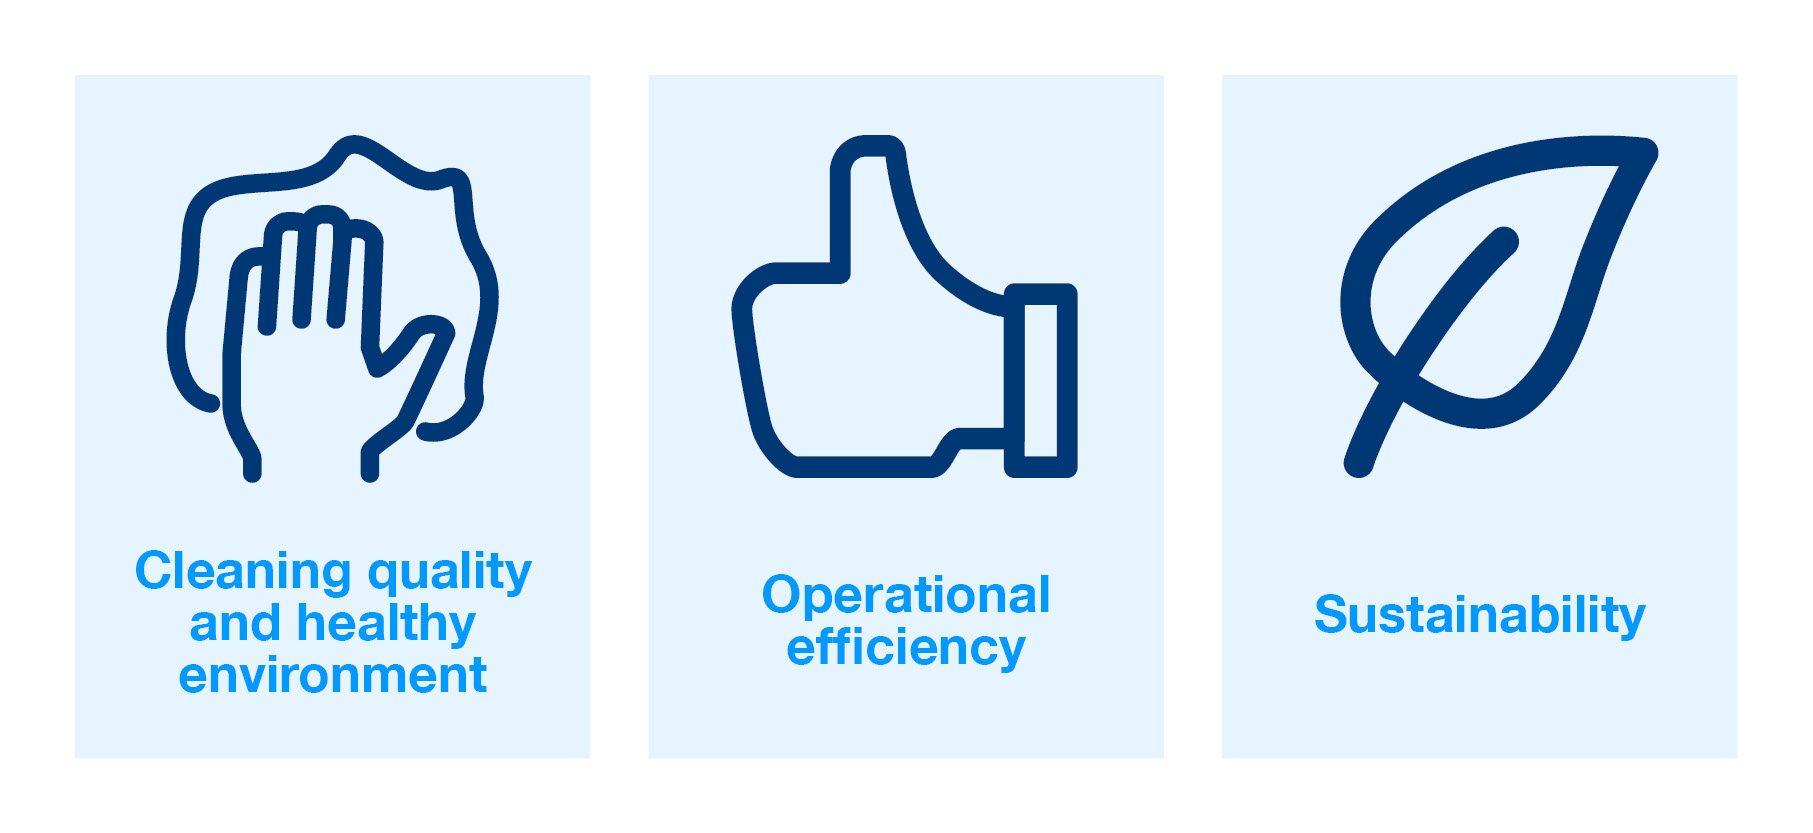 Facility manager priorities, cleaning, operational efficiency, sustainability